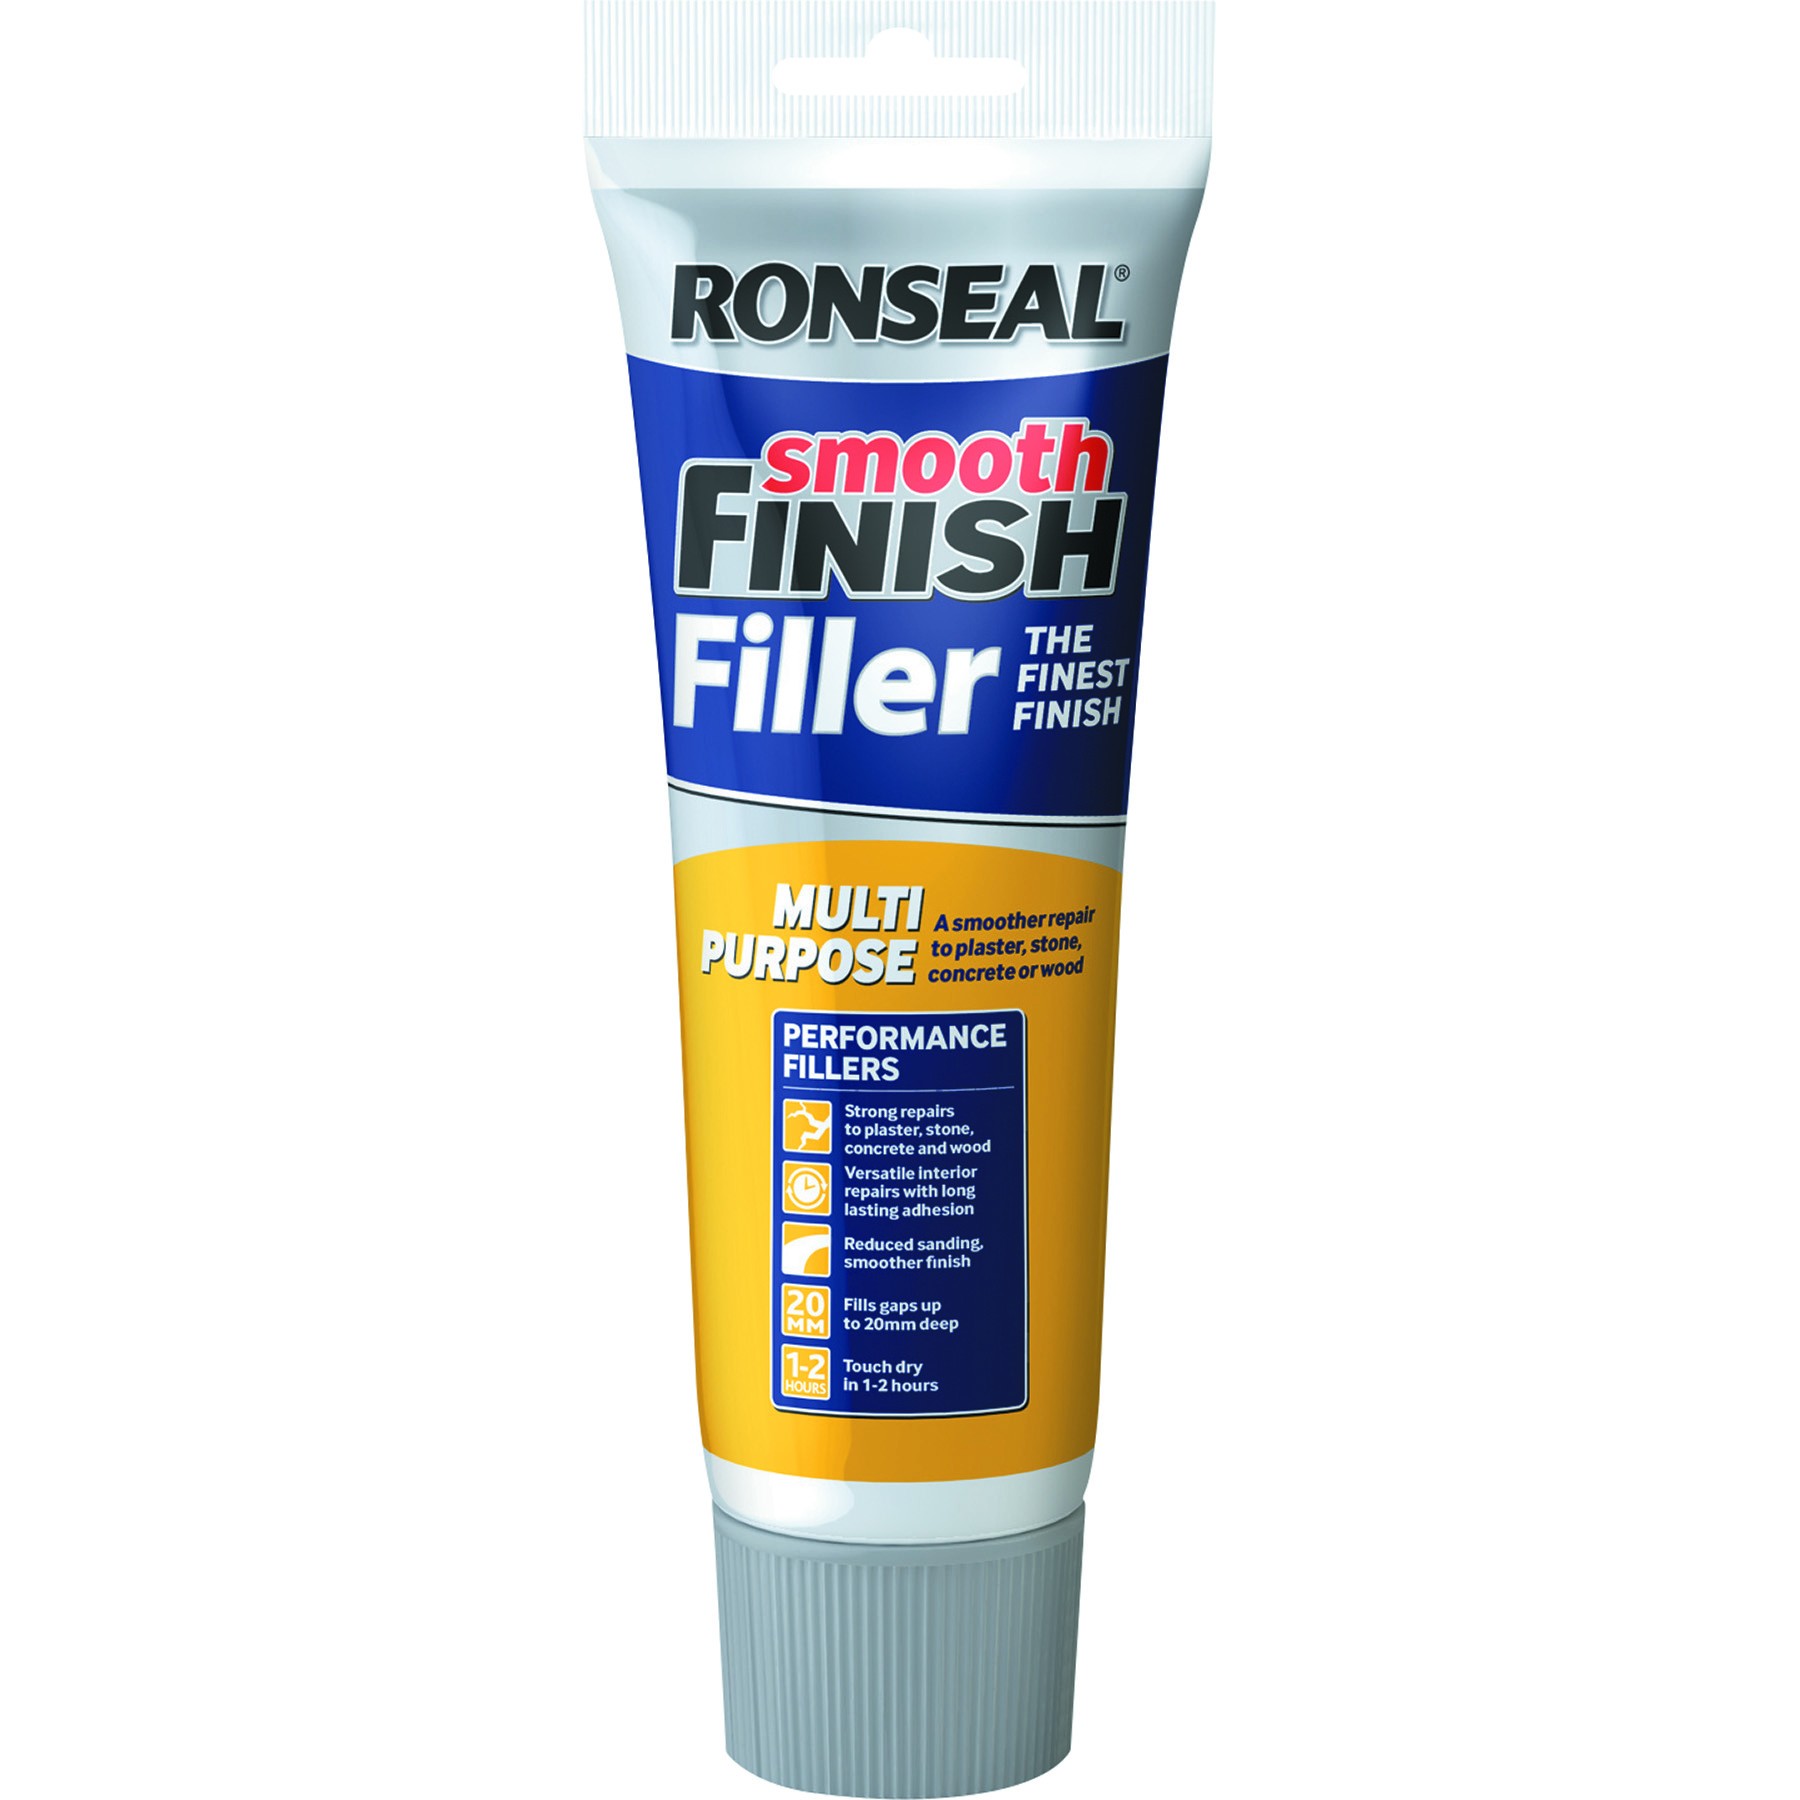 Ronseal Smooth Finish Multi Purpose Ready Mix Wall Filler 1.2kg + 50% [RONS36546]